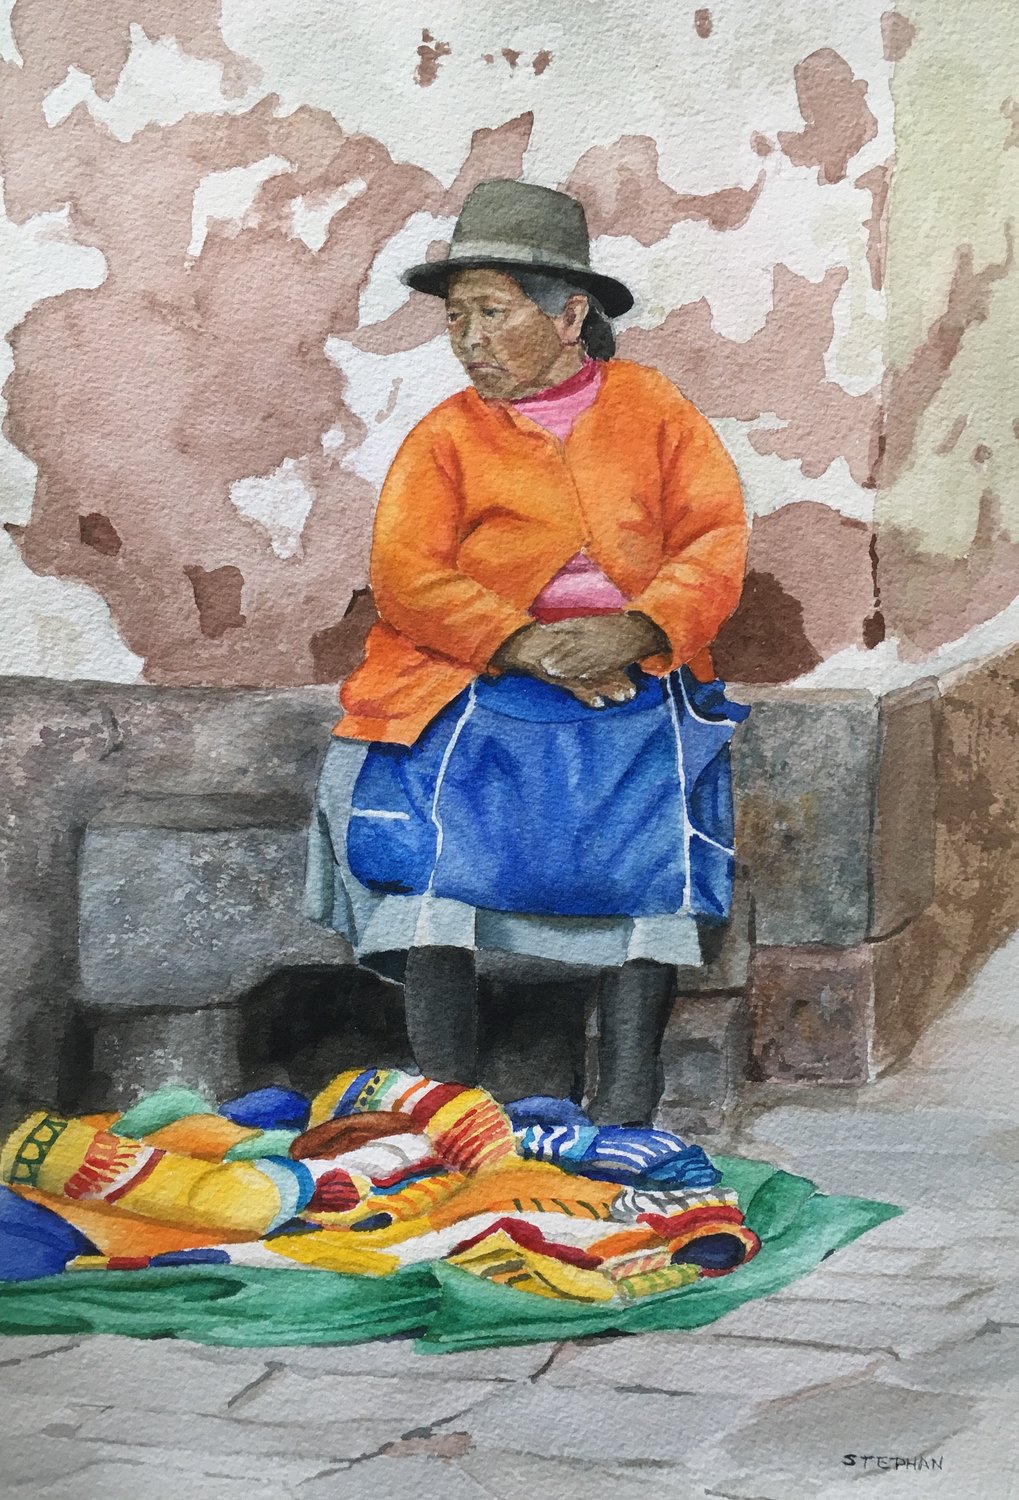 The exhibit “Bag Lady” will on display through Saturday, July 31.